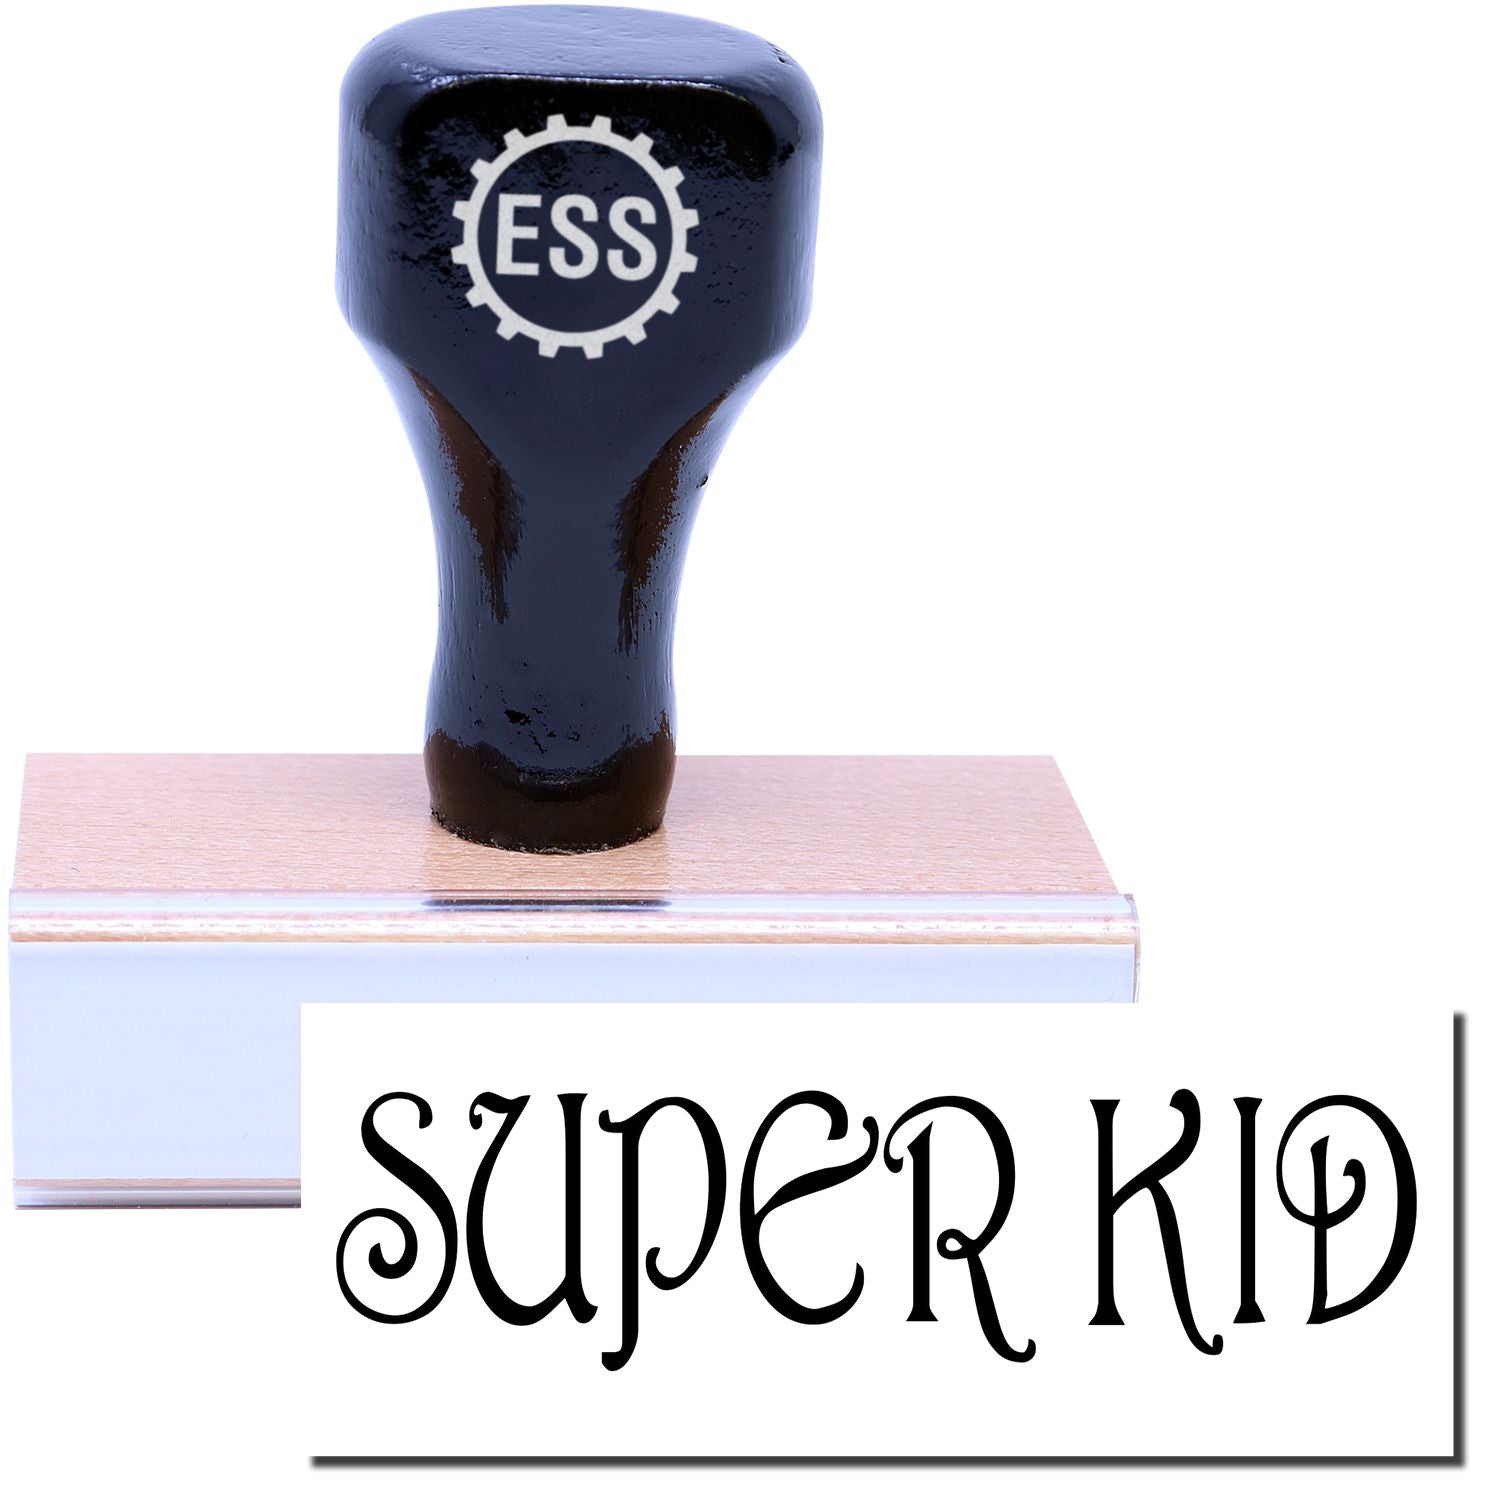 A stock office rubber stamp with a stamped image showing how the text "SUPER KID" in a large font is displayed after stamping.